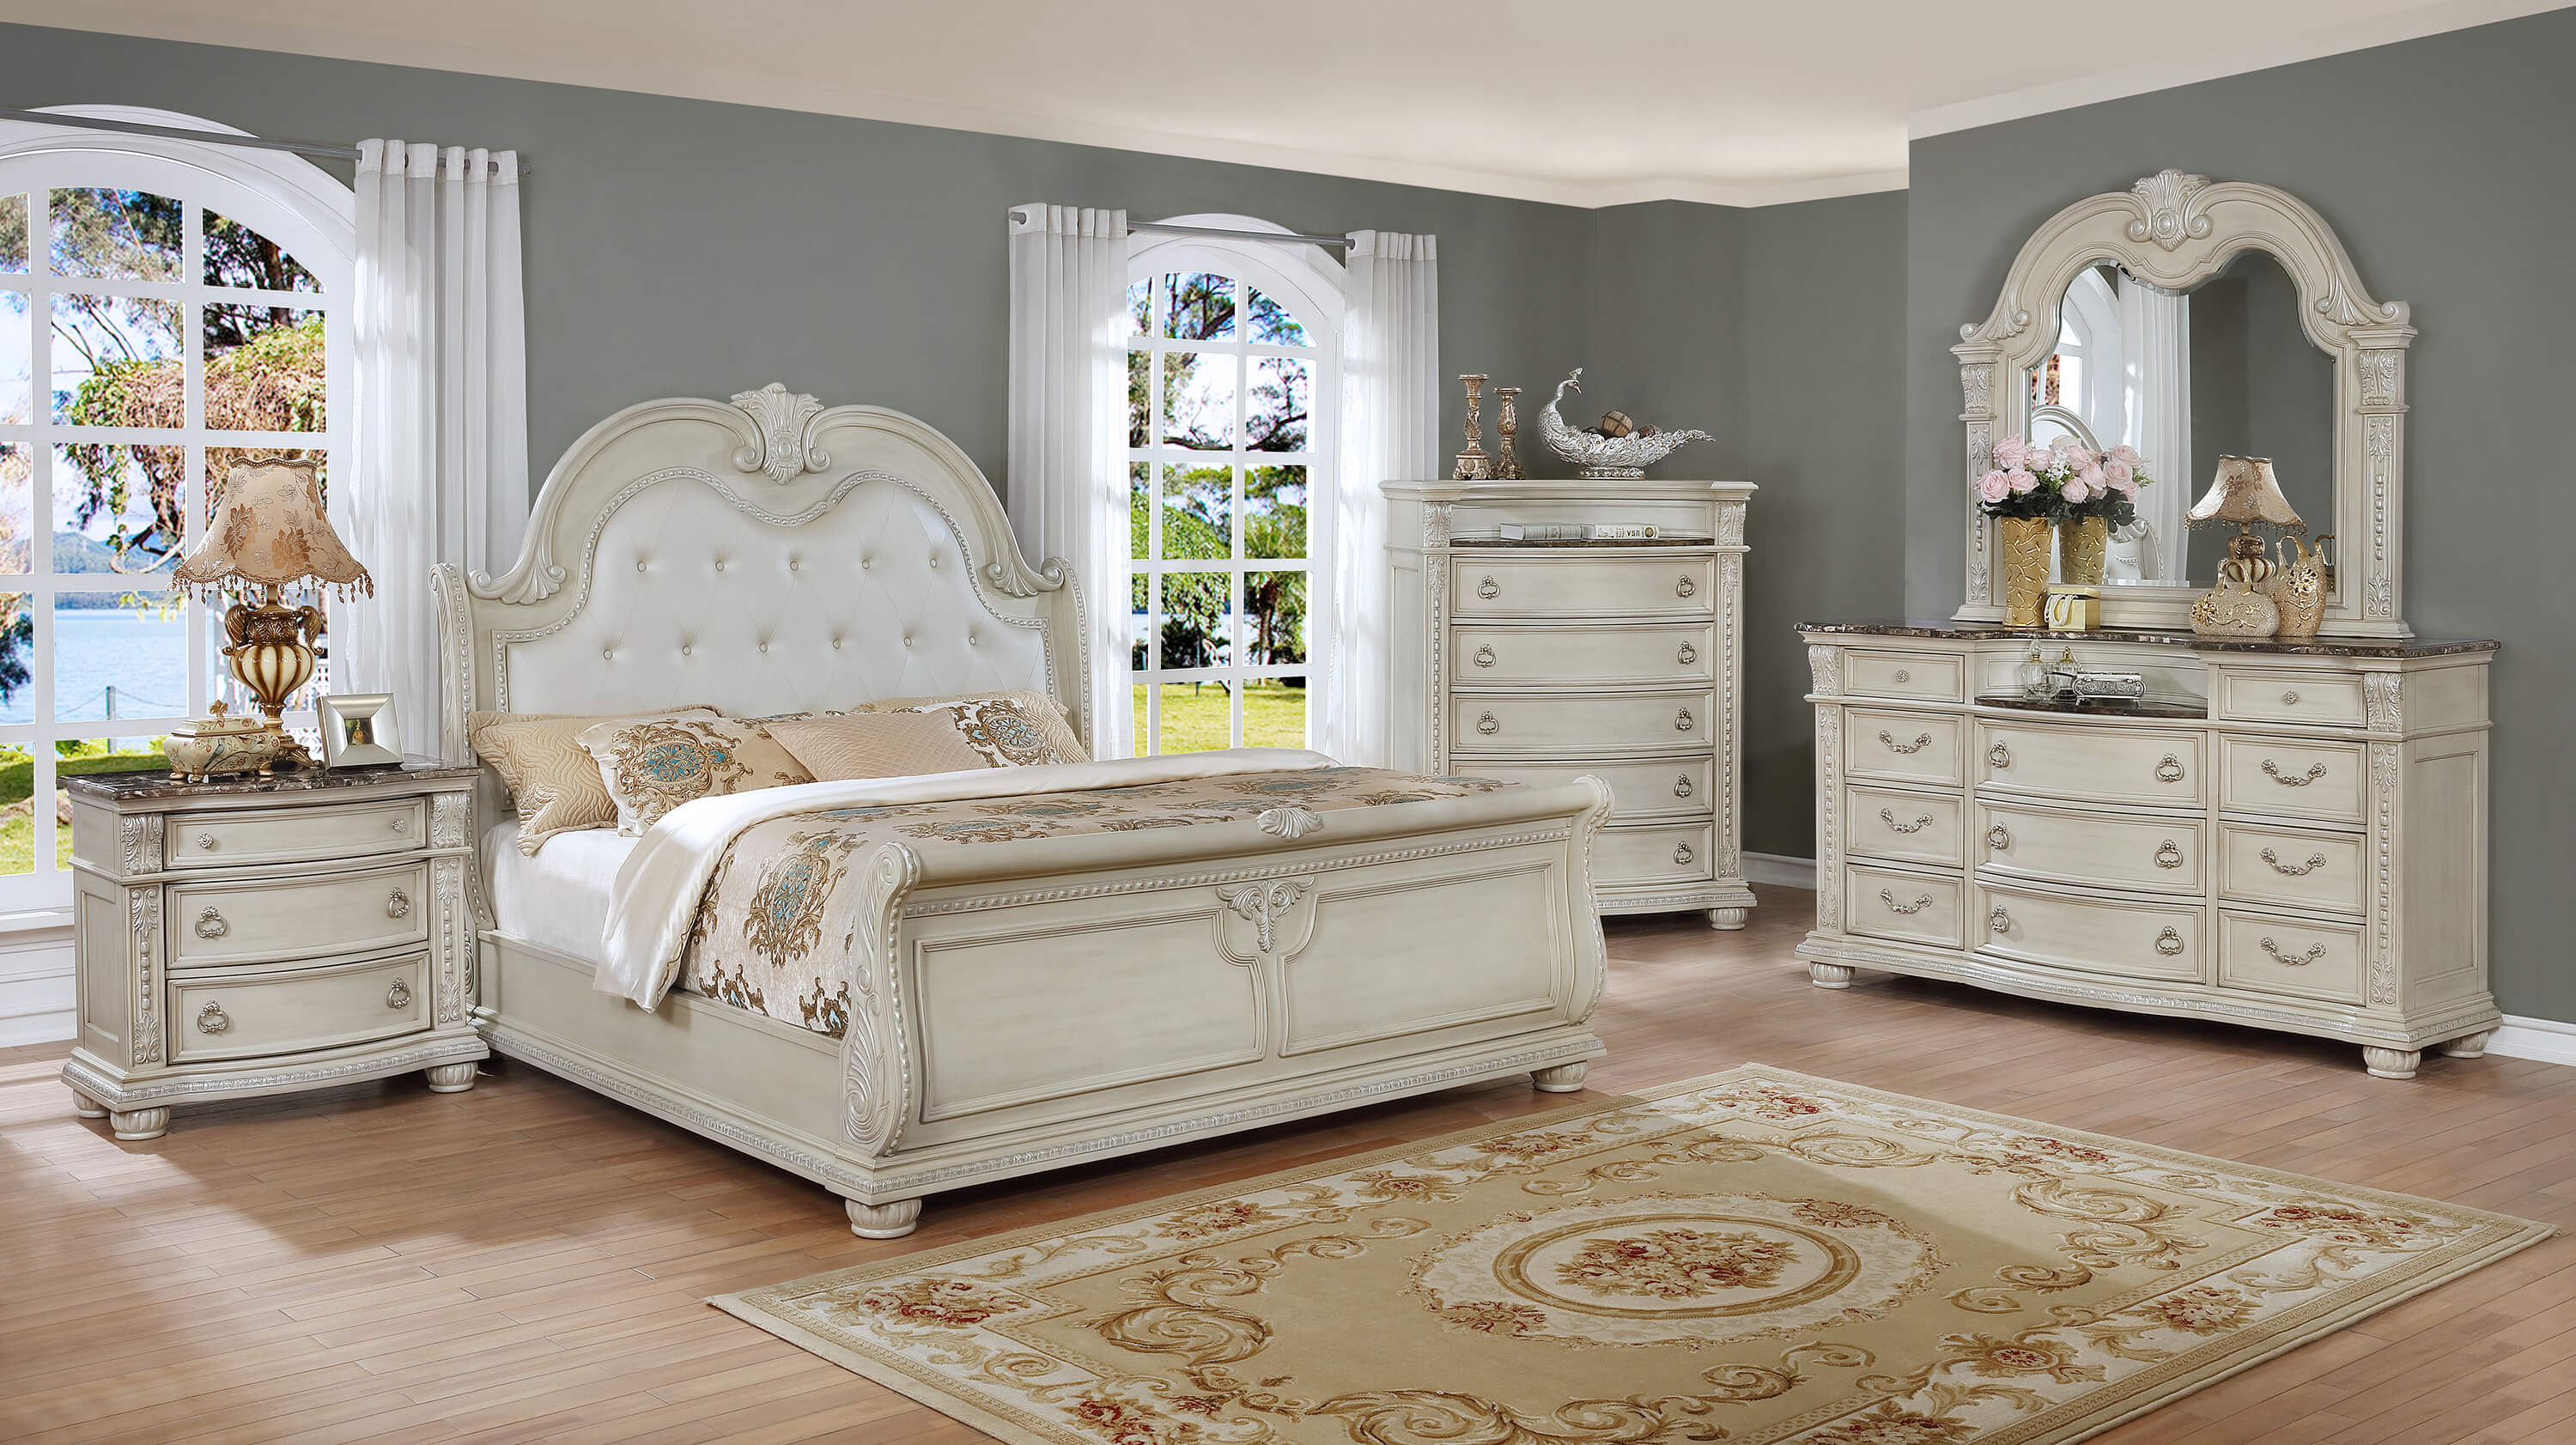 B1630 Stanley Antique White Marble Bedroom Set Crown Mark for dimensions 3000 X 1683